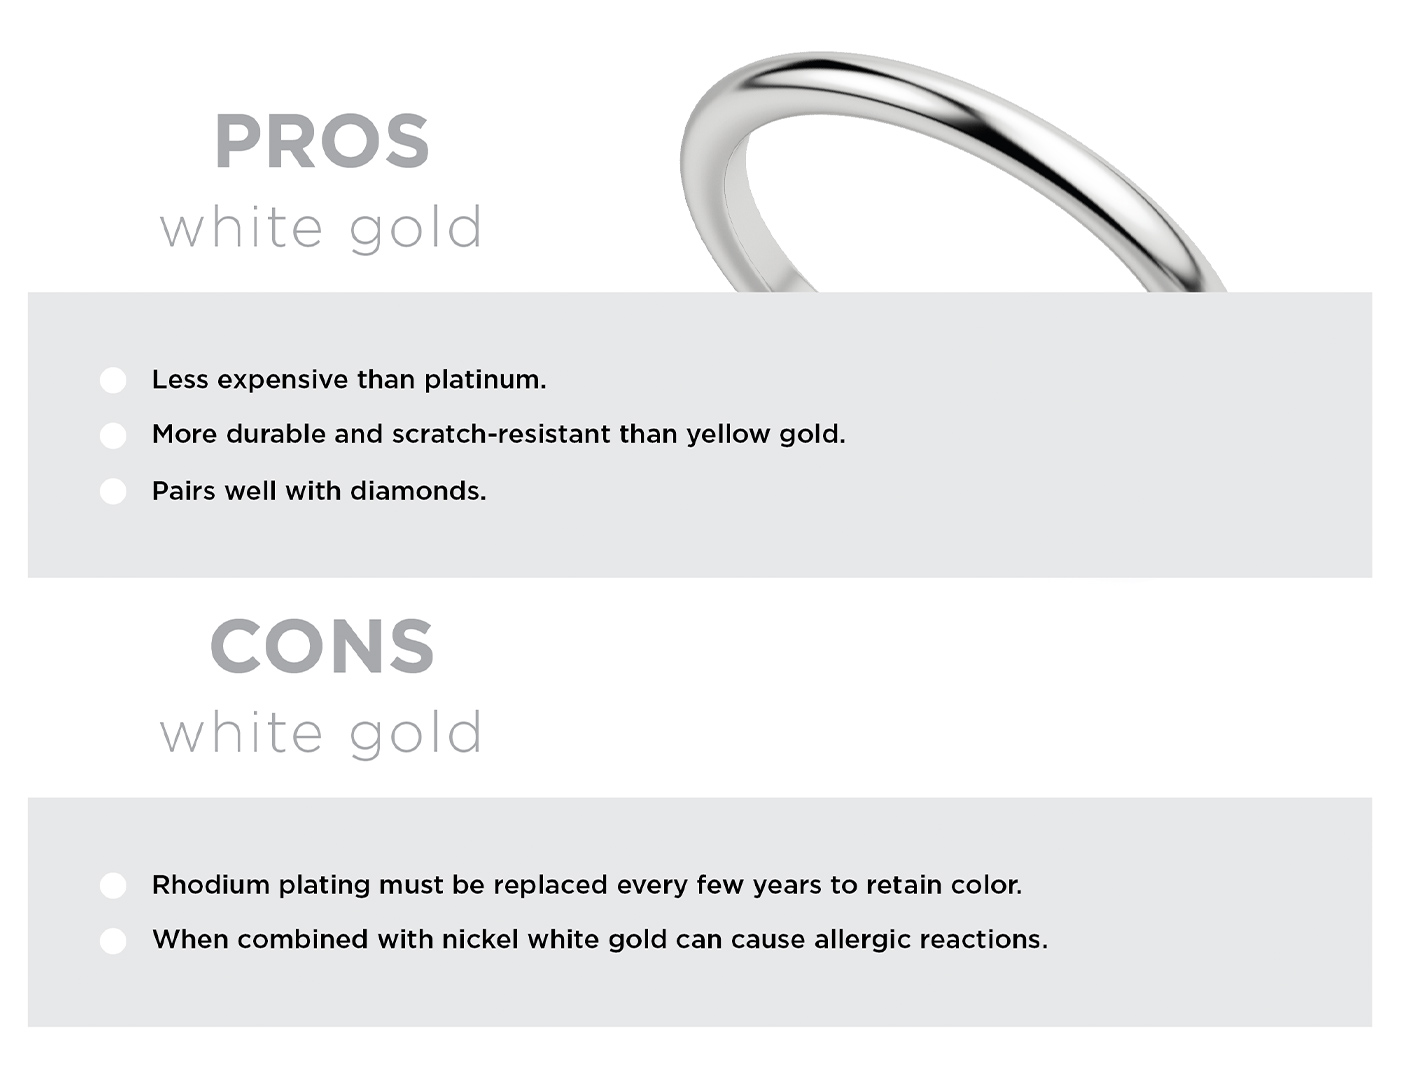 The pros and cons of white gold